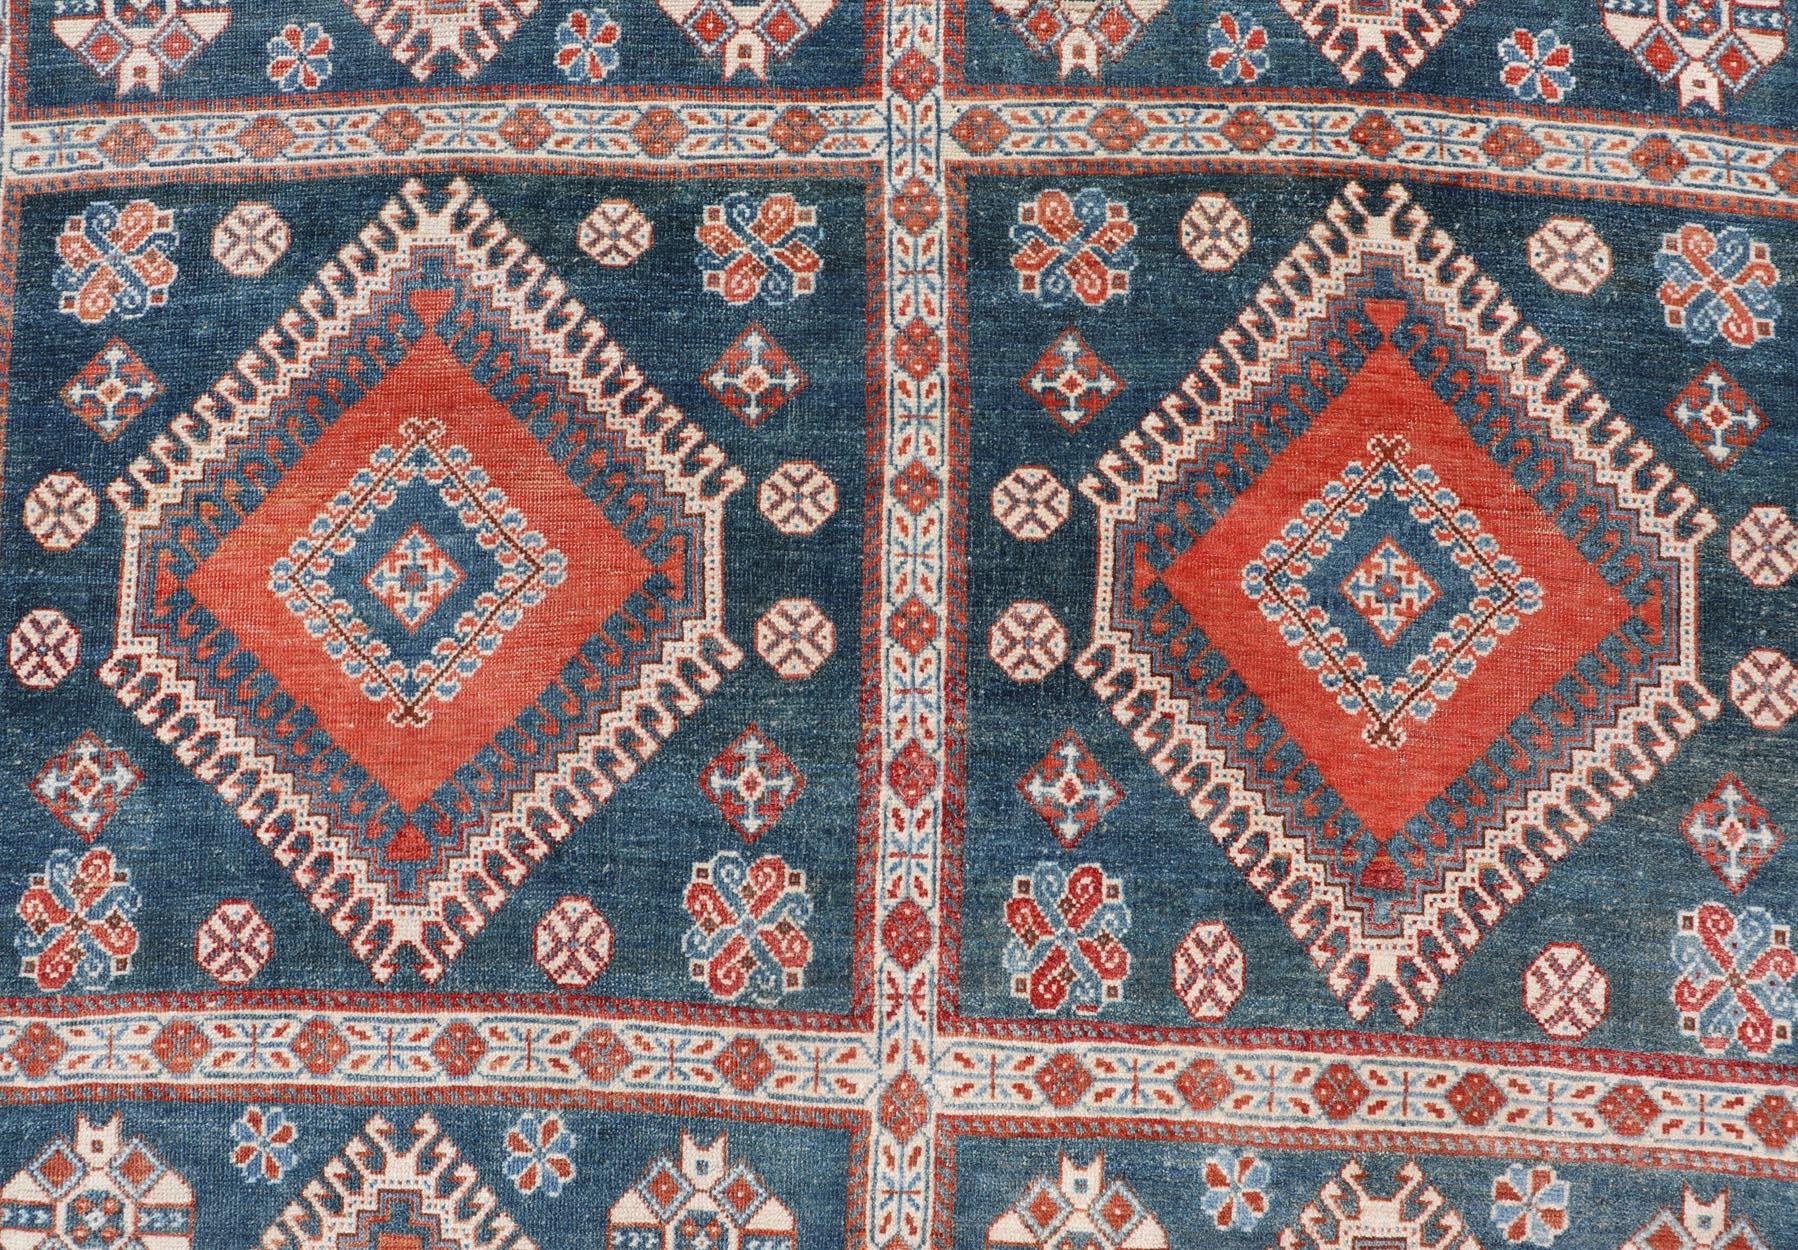 Antique Persian Shiraz Rug with Geometric Design, Keivan Woven Arts; rug EMB-9604-P13873, country of origin / type: Iran / Tabriz, circa 1910.

Measures: 7'2 x 10'3.


This antique Persian Shiraz rug has been hand-knotted in wool and features an